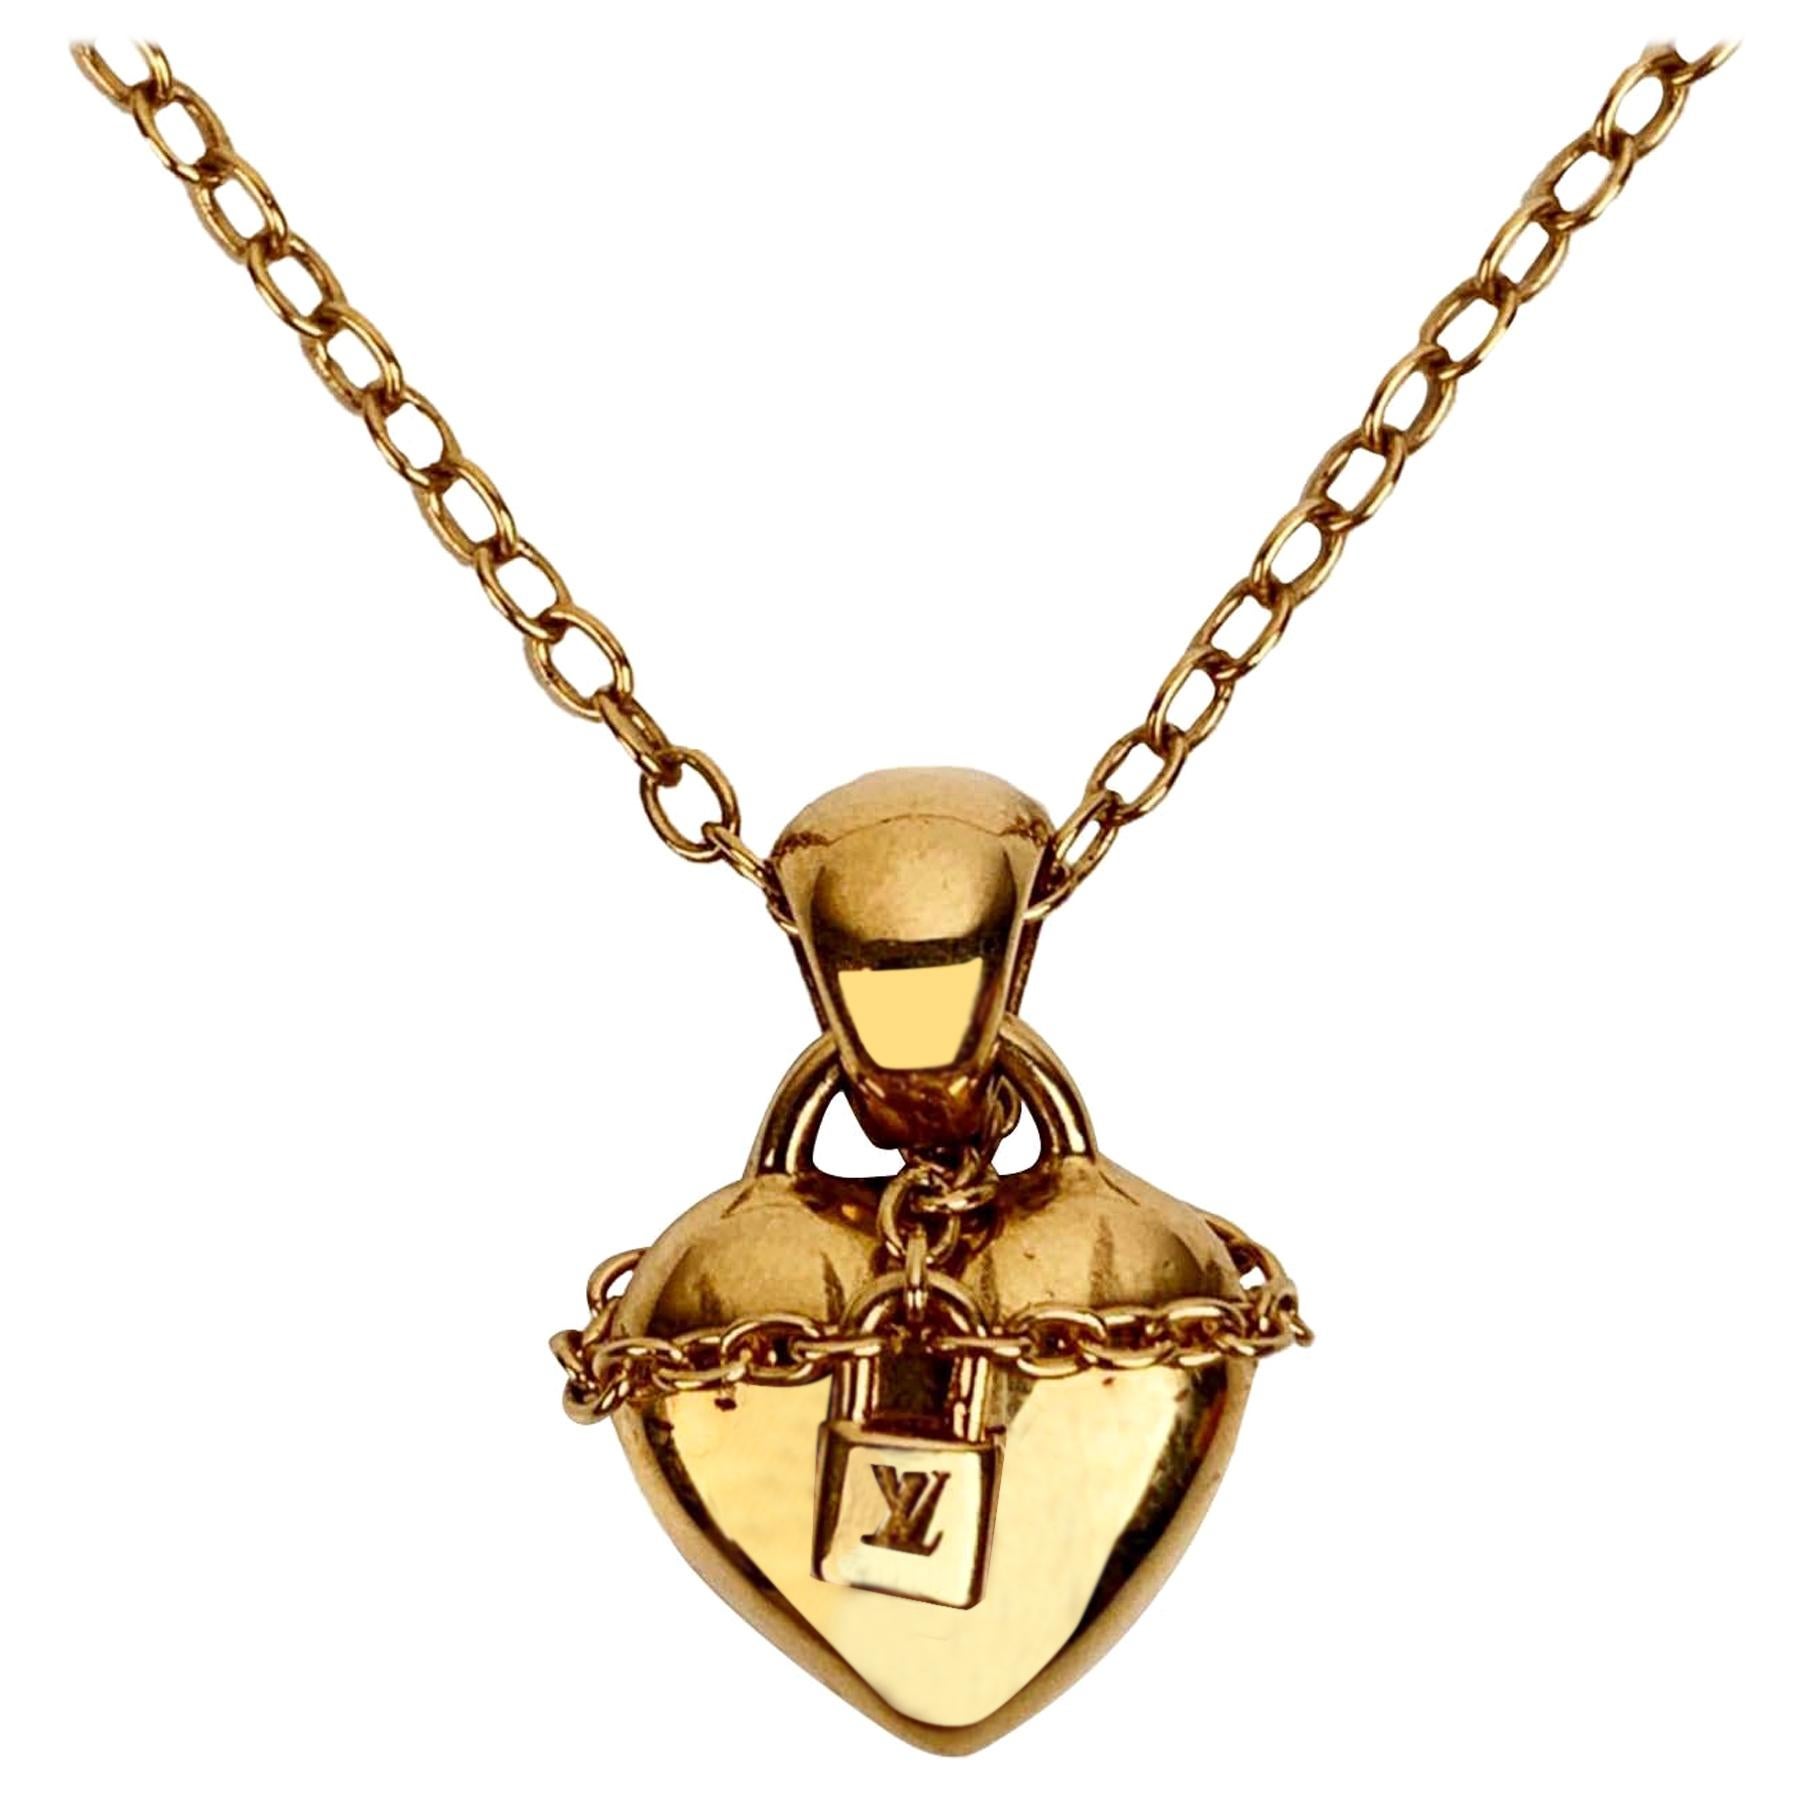 gold lv lock necklace